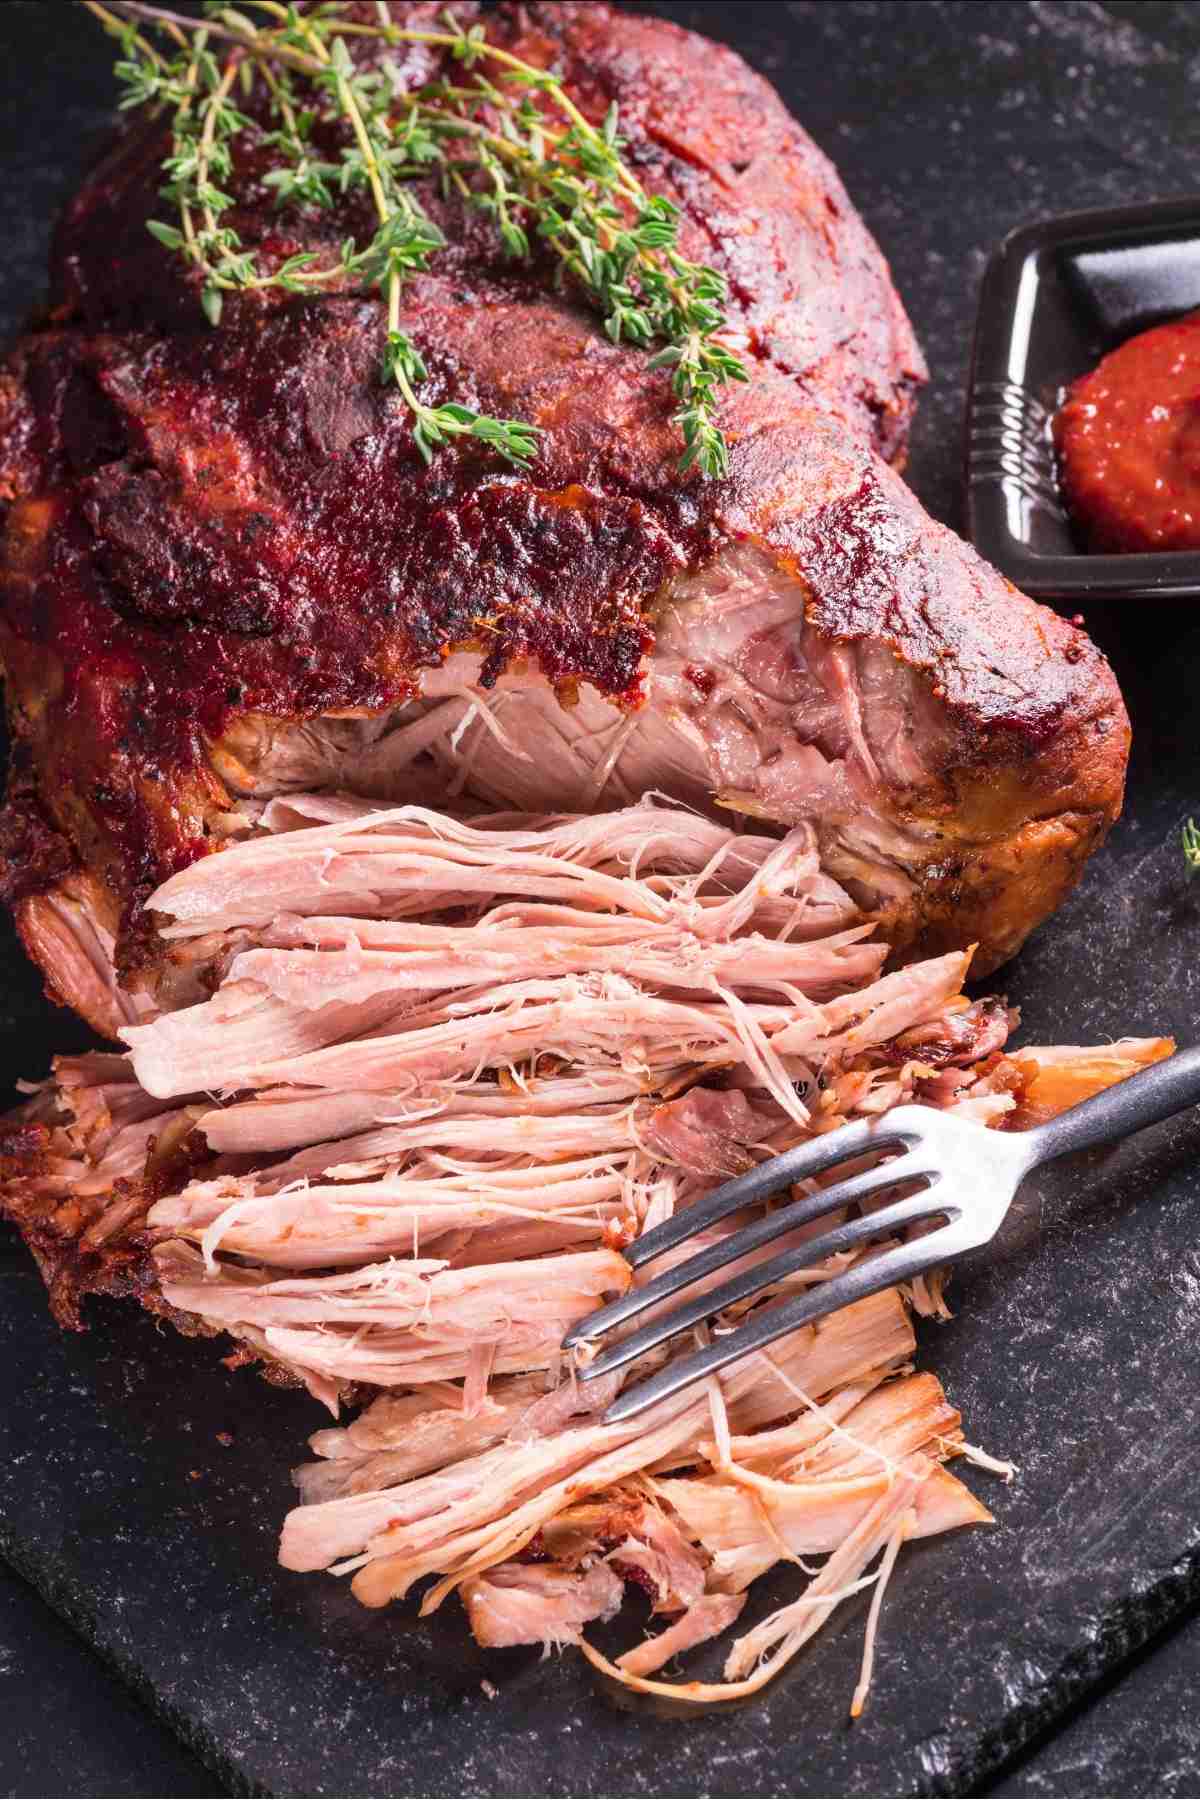 When cooked just right, pork butt or shoulder just pulls apart with a fork. So tender and juicy, pulled pork is a mouthwatering way to serve this meat and barbecue fans are well aware of this already. The key is knowing when the pork is “done.” The most important part of acing this style of cooking is to check the internal temperature.